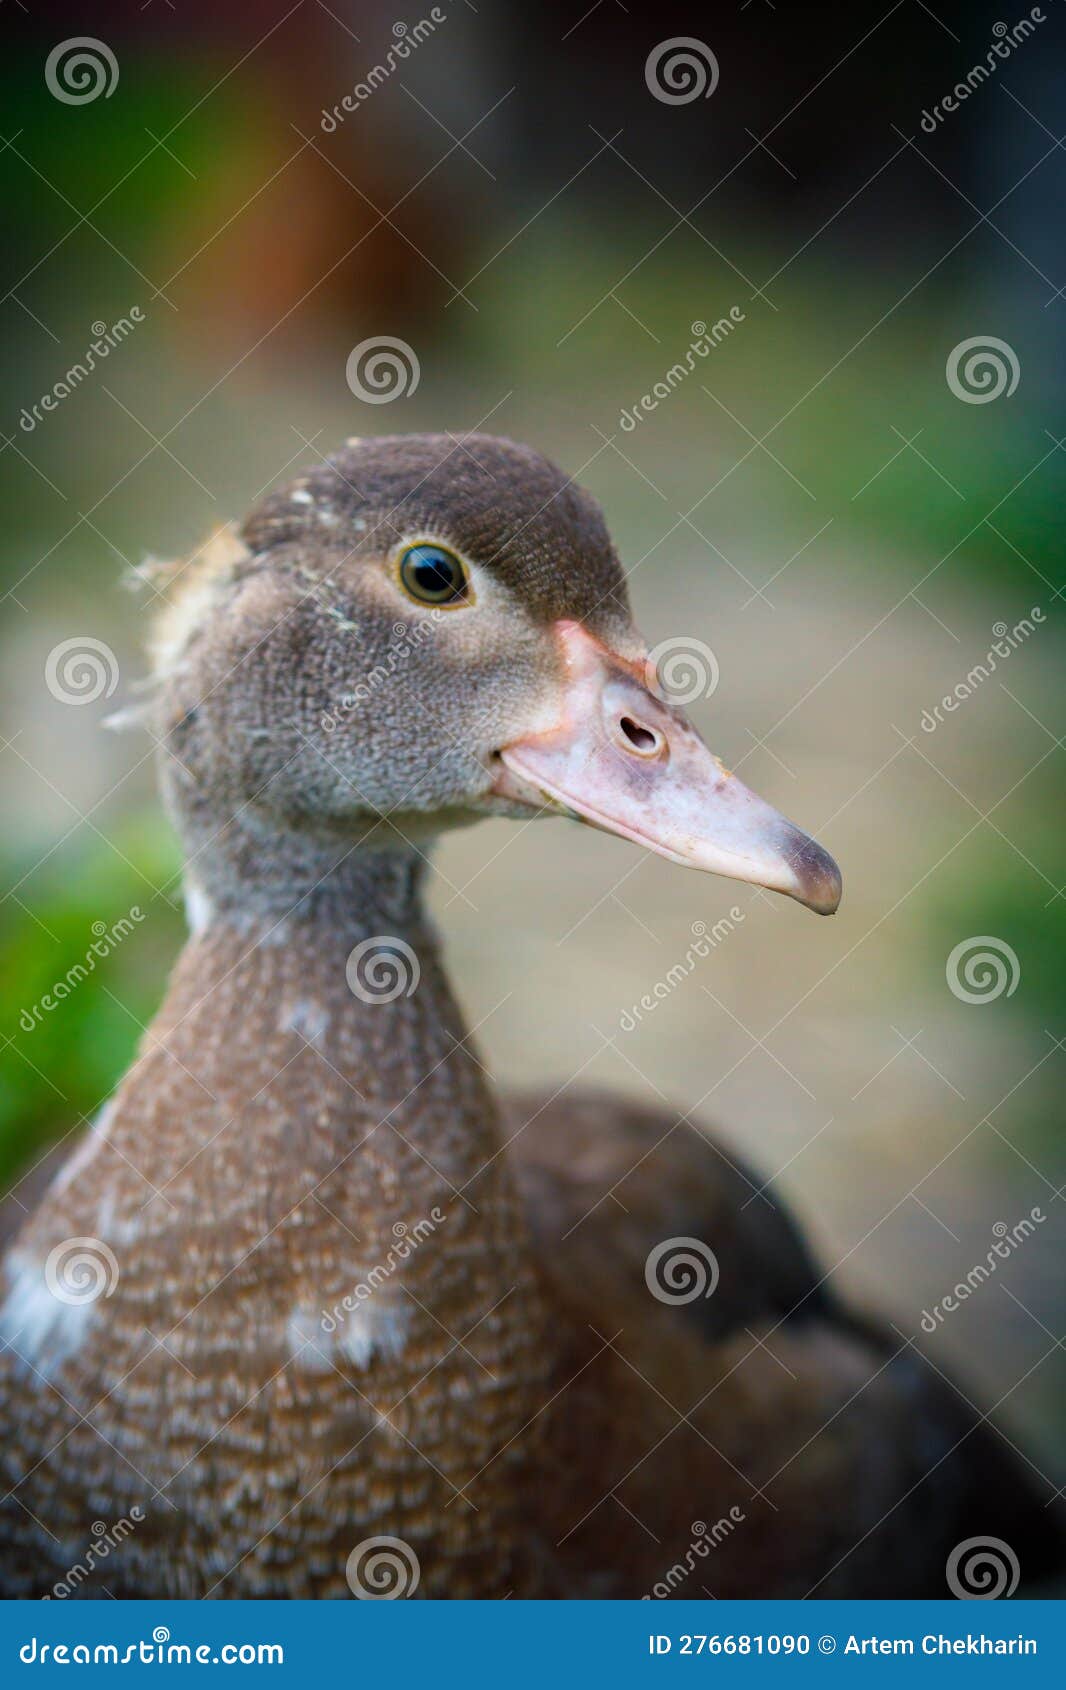 duck. farm with goose, wings, beak, poultry egg. hens duckling village household. avifauna concept. high quality photo